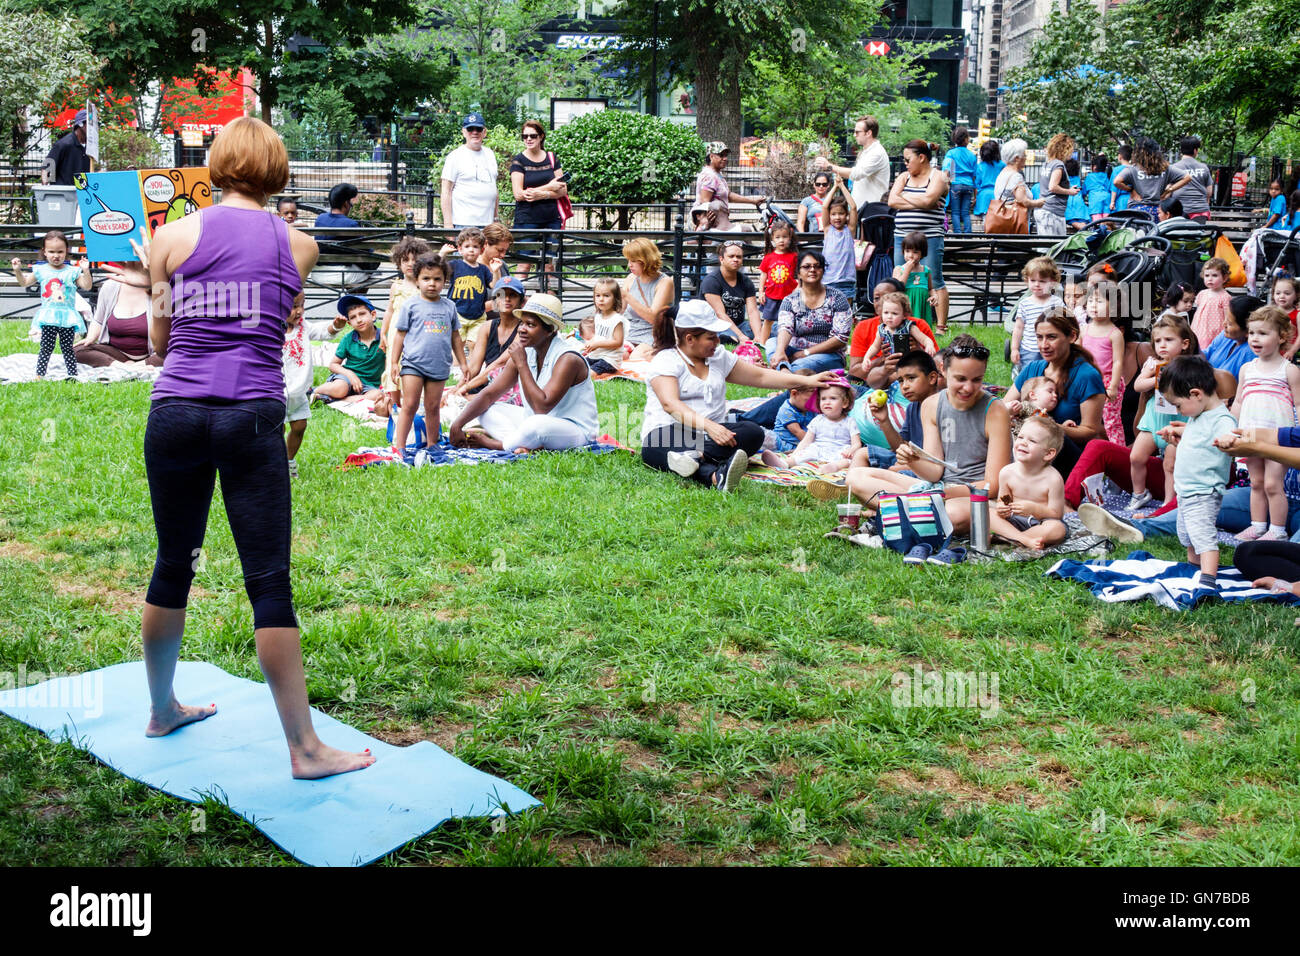 New York City,NY NYC,Manhattan,Midtown,Union Square Park,public park,Summer in the Square,weekly entertainment series,event,activities,interactive sto Stock Photo